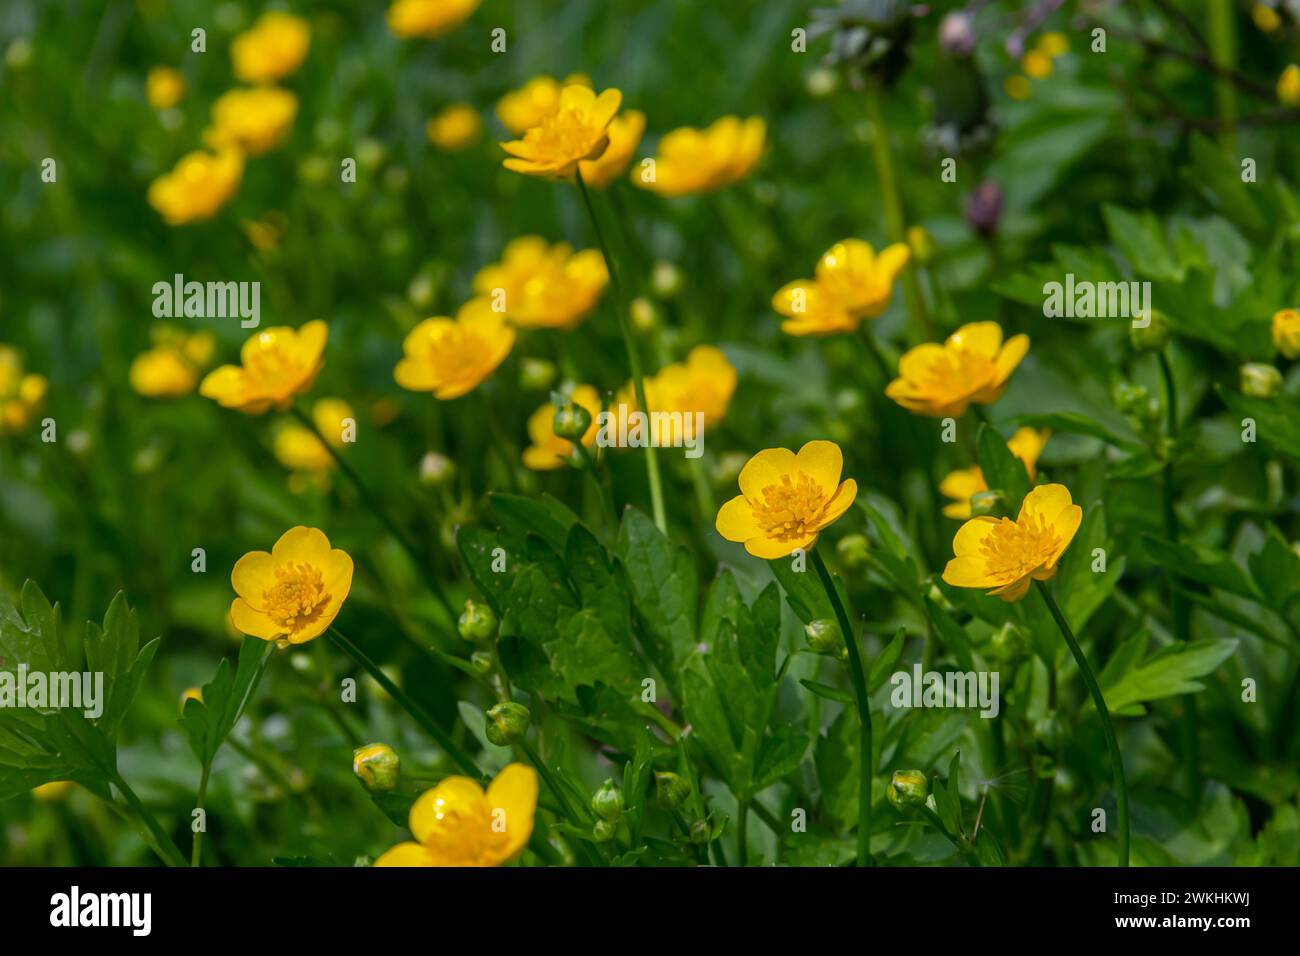 lose-up of Ranunculus repens, the creeping buttercup, is a flowering plant in the buttercup family Ranunculaceae, in the garden. Stock Photo